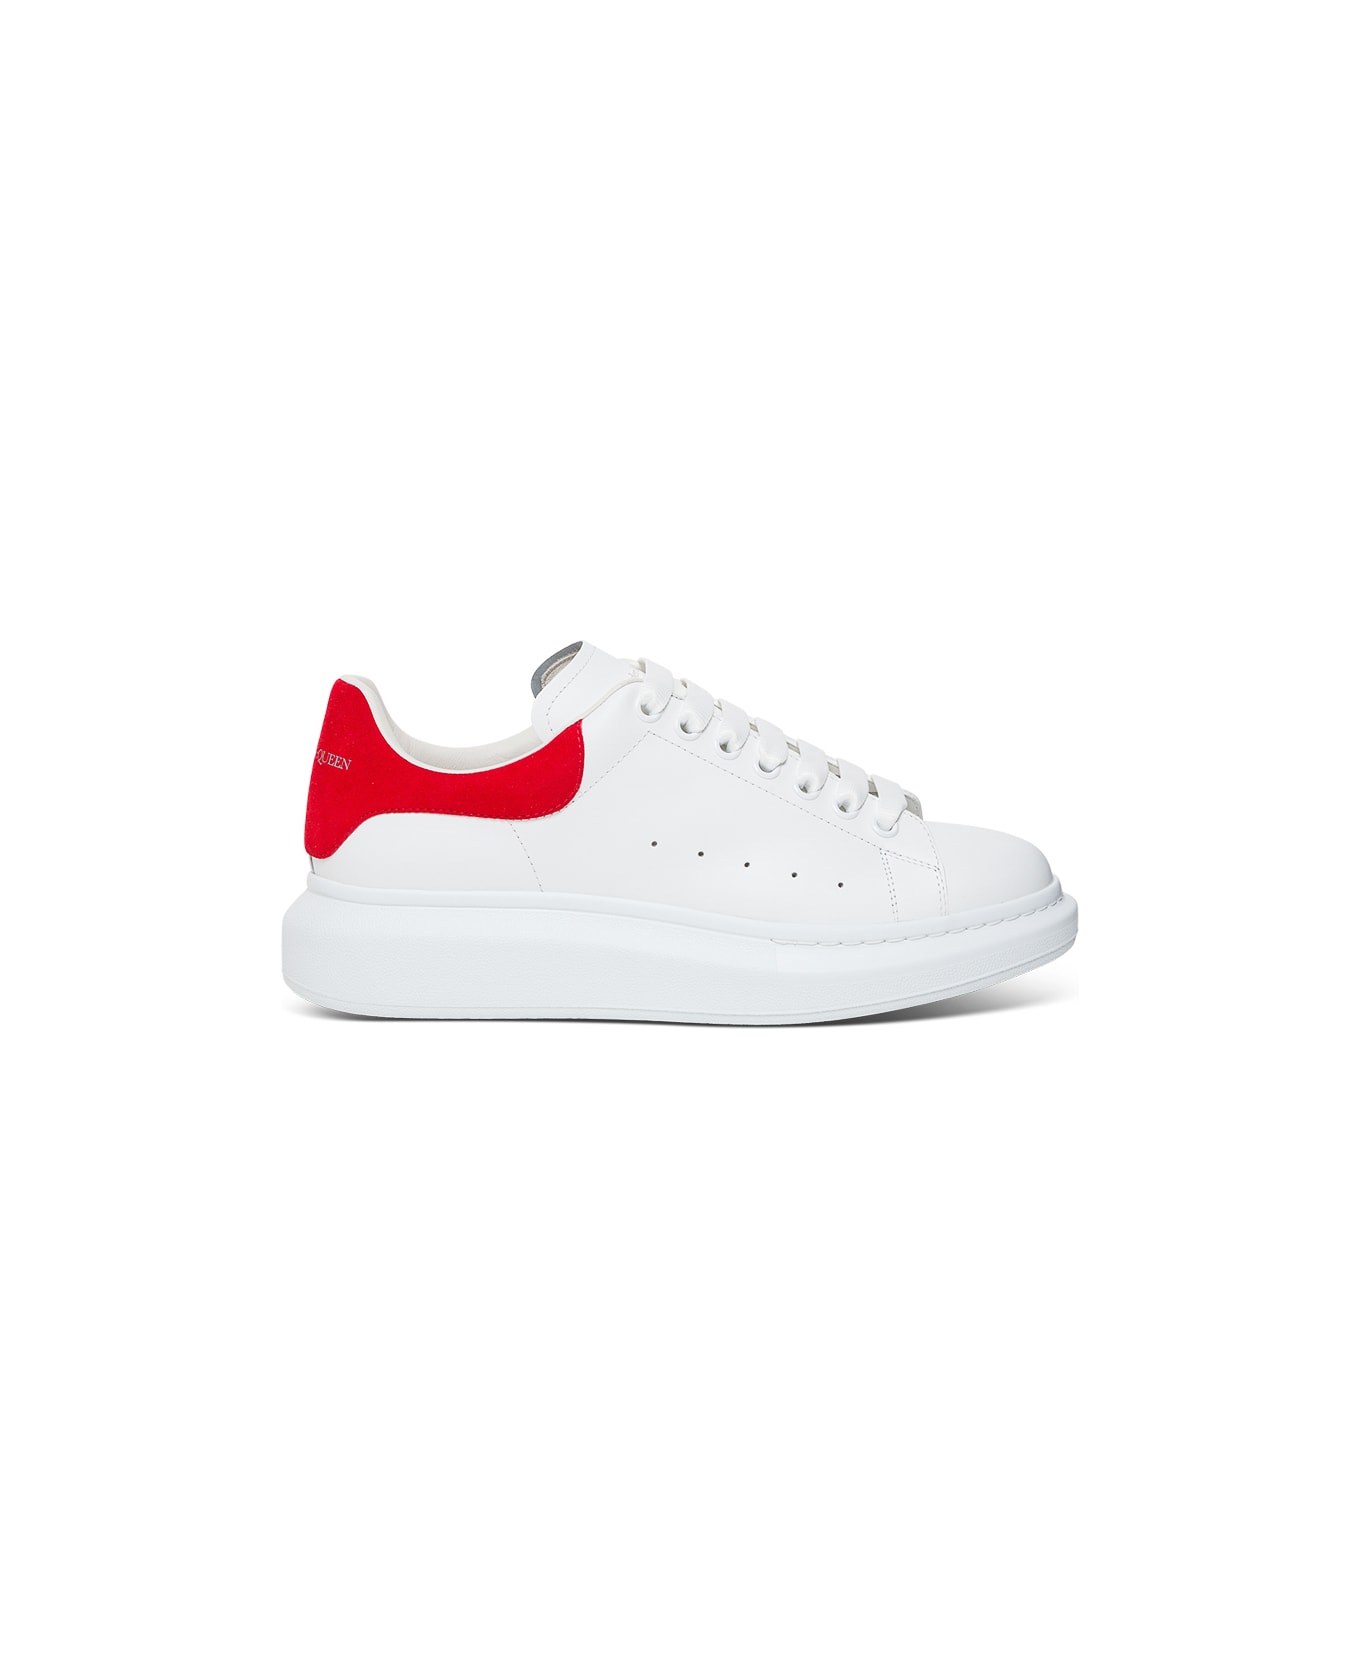 Alexander McQueen Woman 's White Leather With Red Heel Tab Oversize Sneakers - White